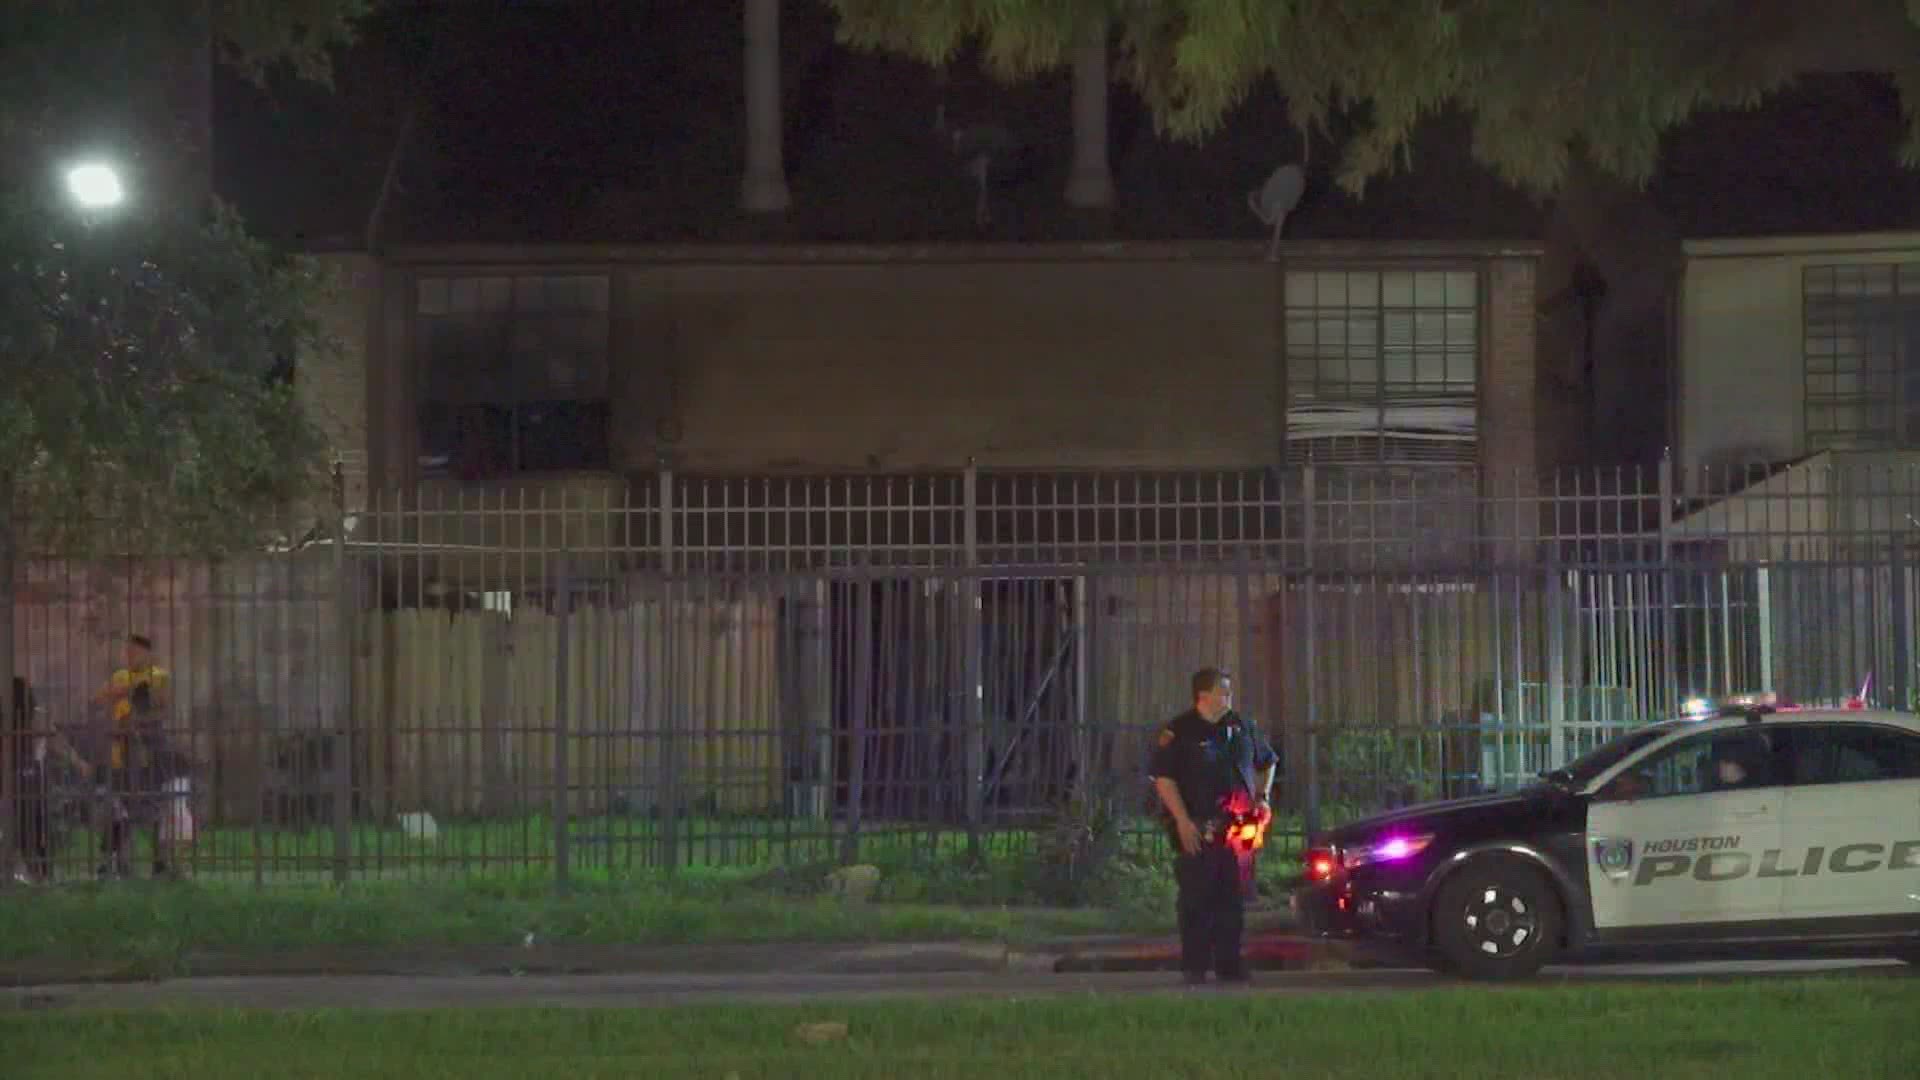 The fire happened overnight at a complex along Braeswood